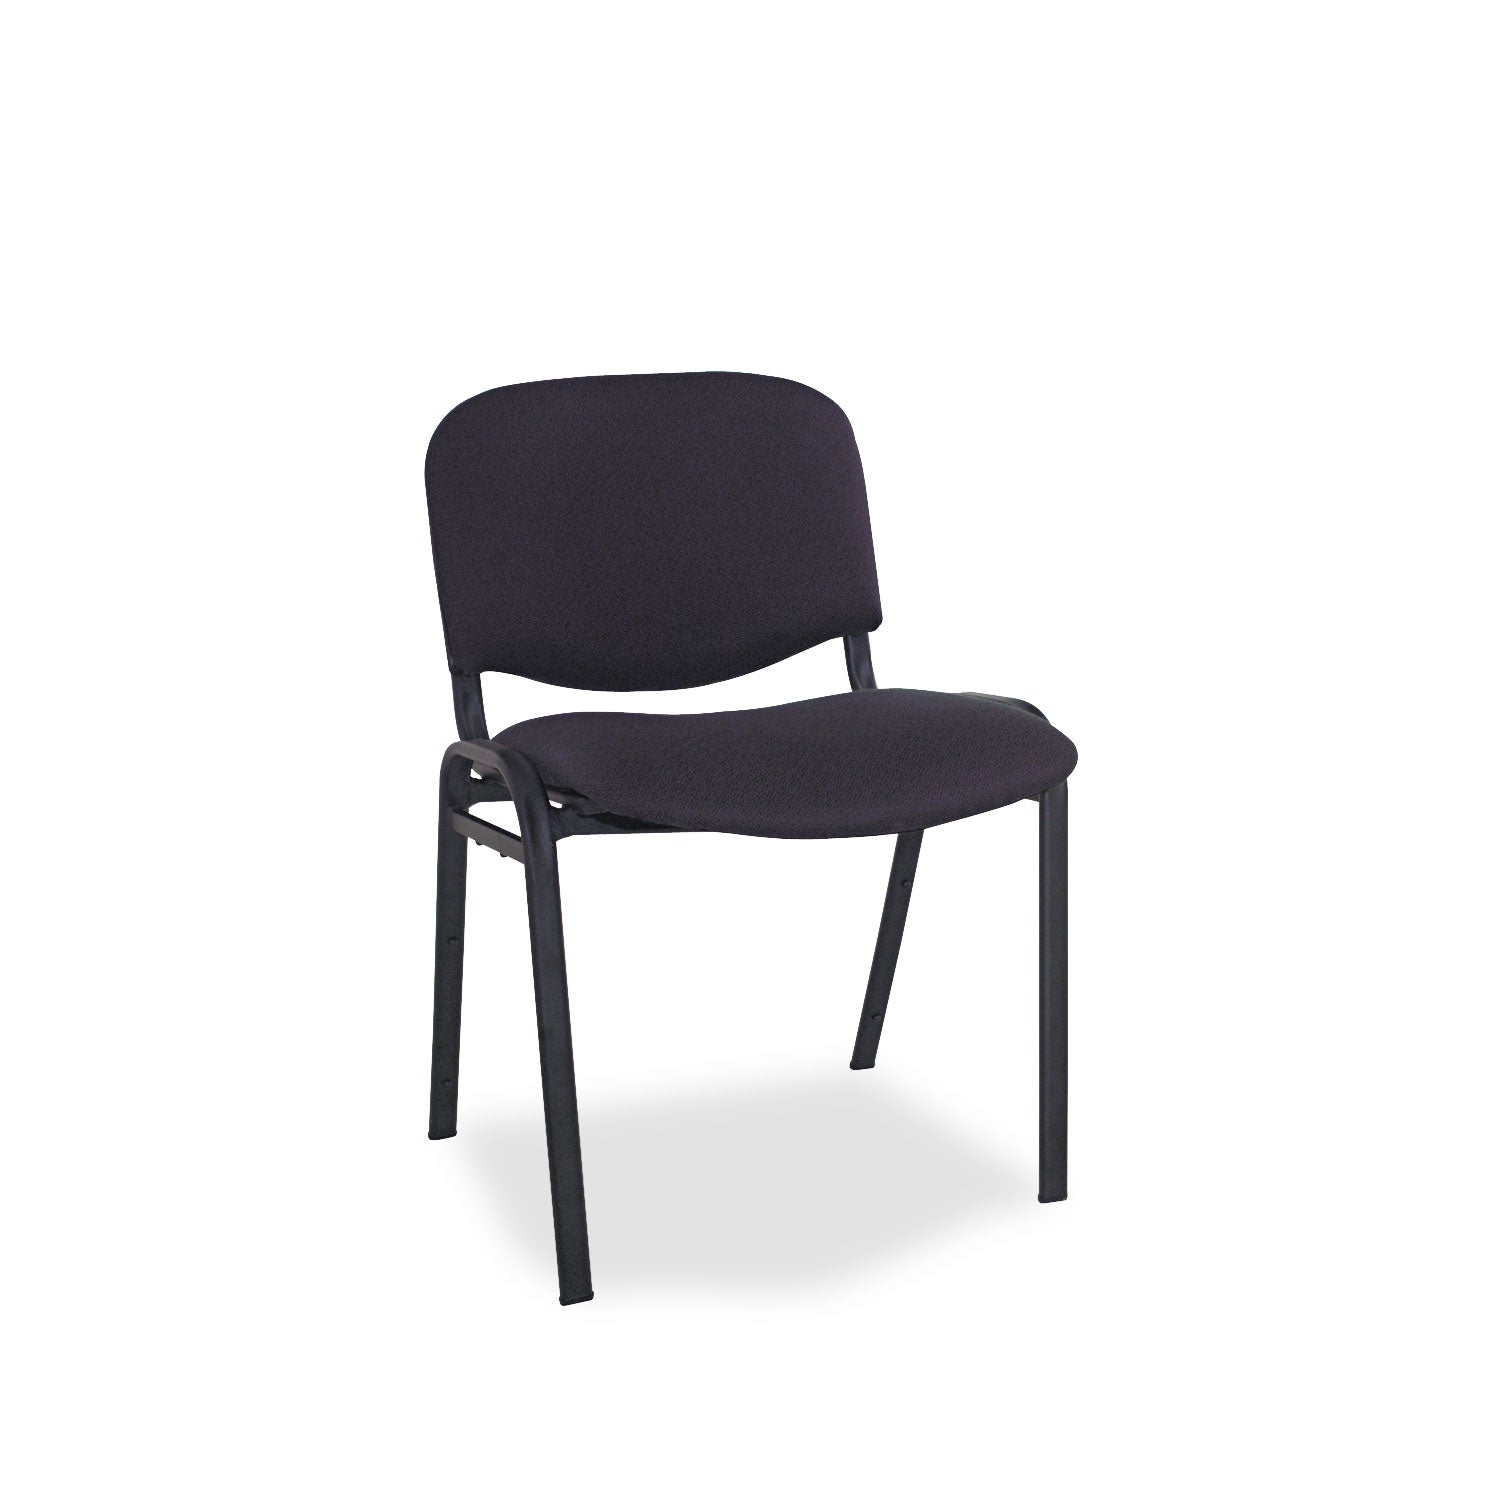 Alera Continental Series Stacking Chairs, Supports Up to 250 lb, 19.68" Seat Height, Black, 4/Carton - 